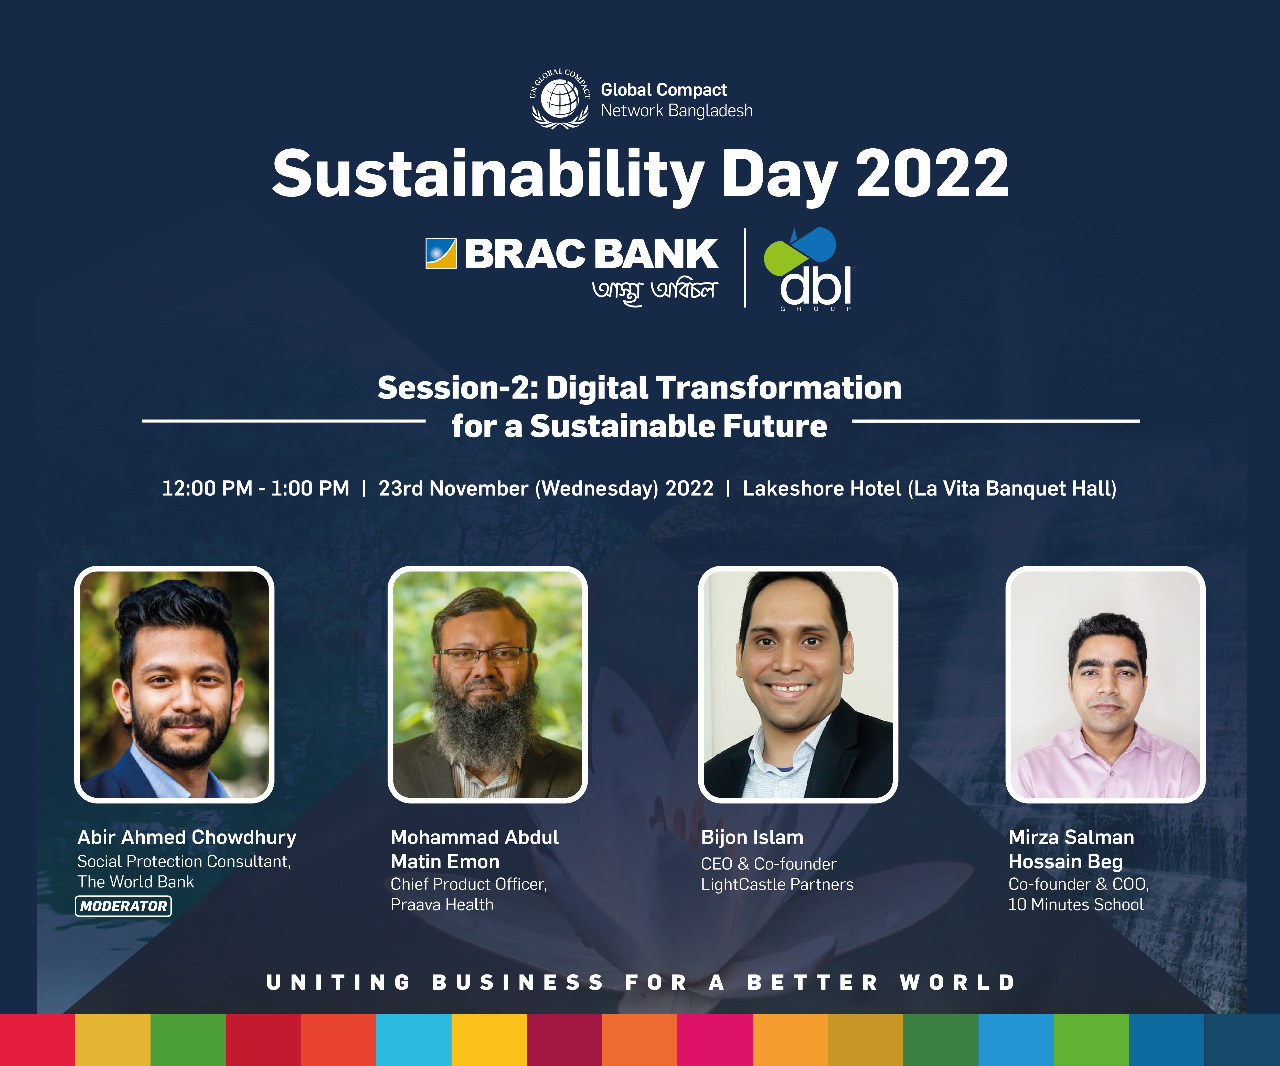 LightCastle Co-Founder & CEO Bijon Islam recently attended Sustainability Day 2022, a day-long event to address Sustainability in Bangladesh, challenges, and progress.